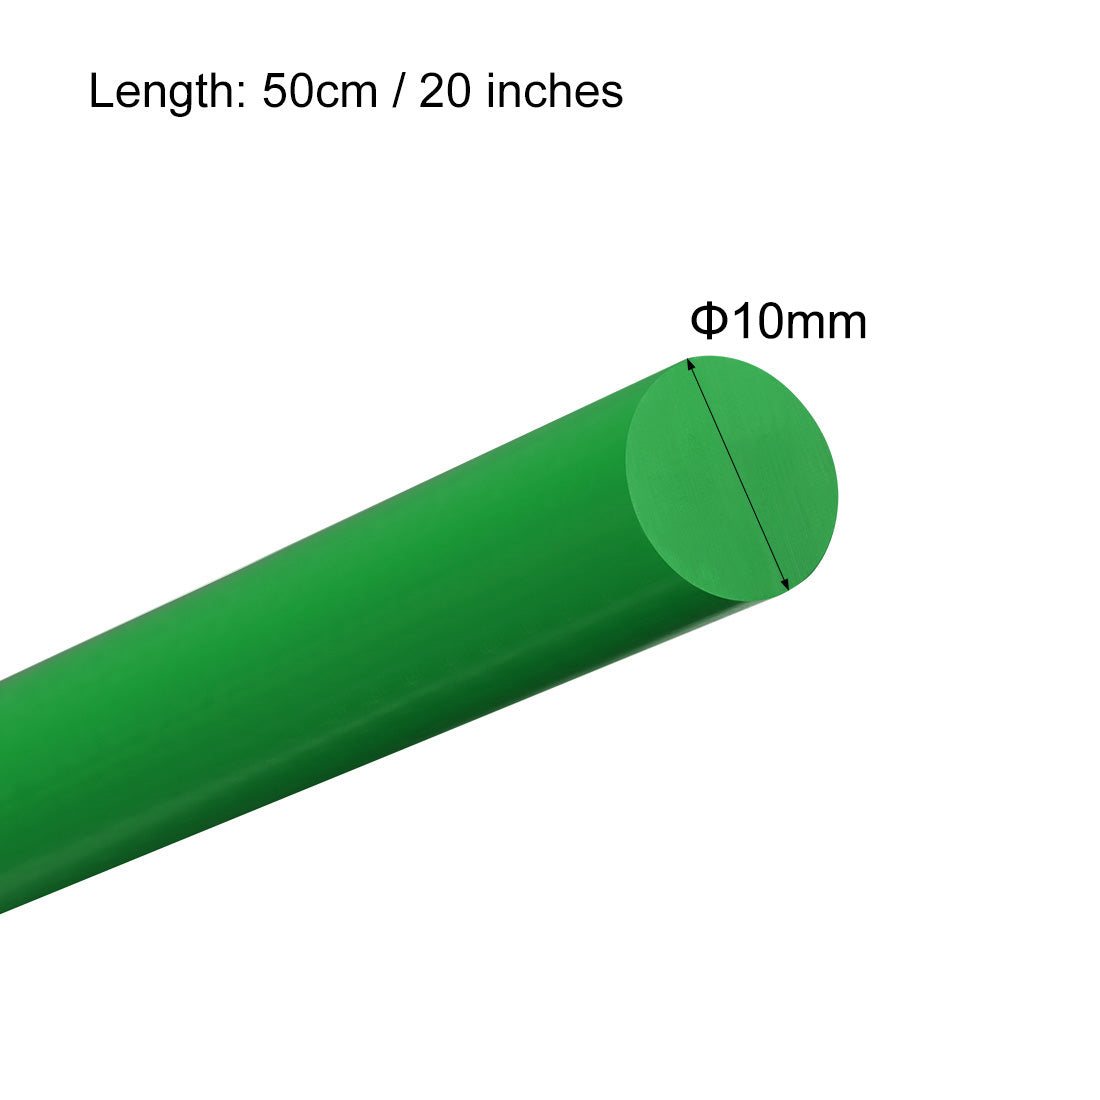 uxcell Uxcell Plastic Round Rod,10mm Dia 50cm Green Engineering Plastic Round Bar 3pcs